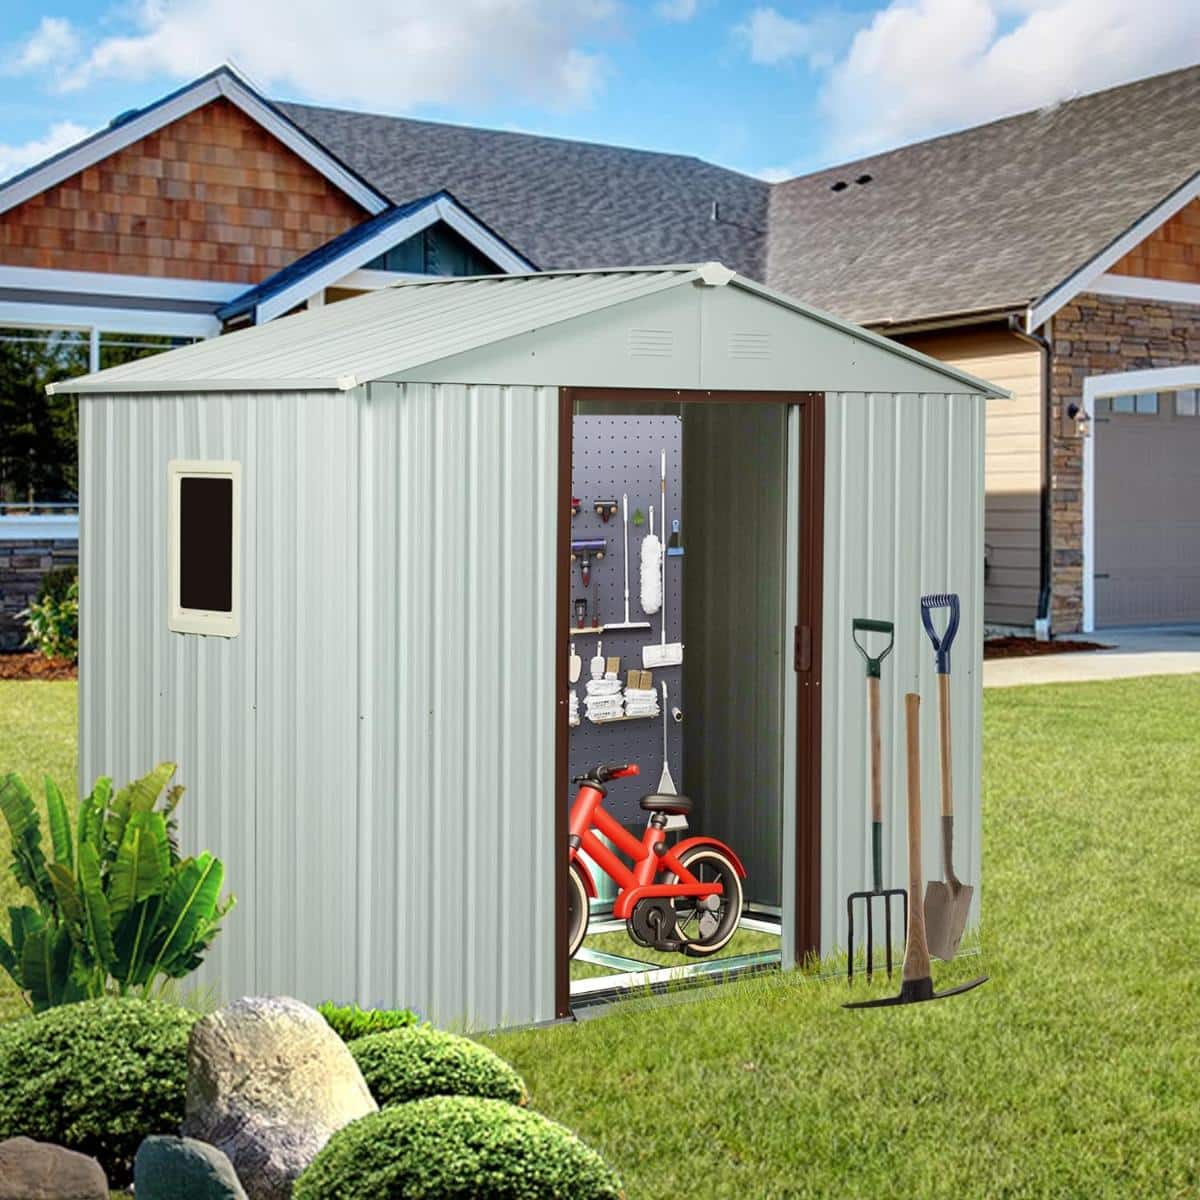 8FT X 4FT Metal Outdoor Storage Shed With Peaked Roof